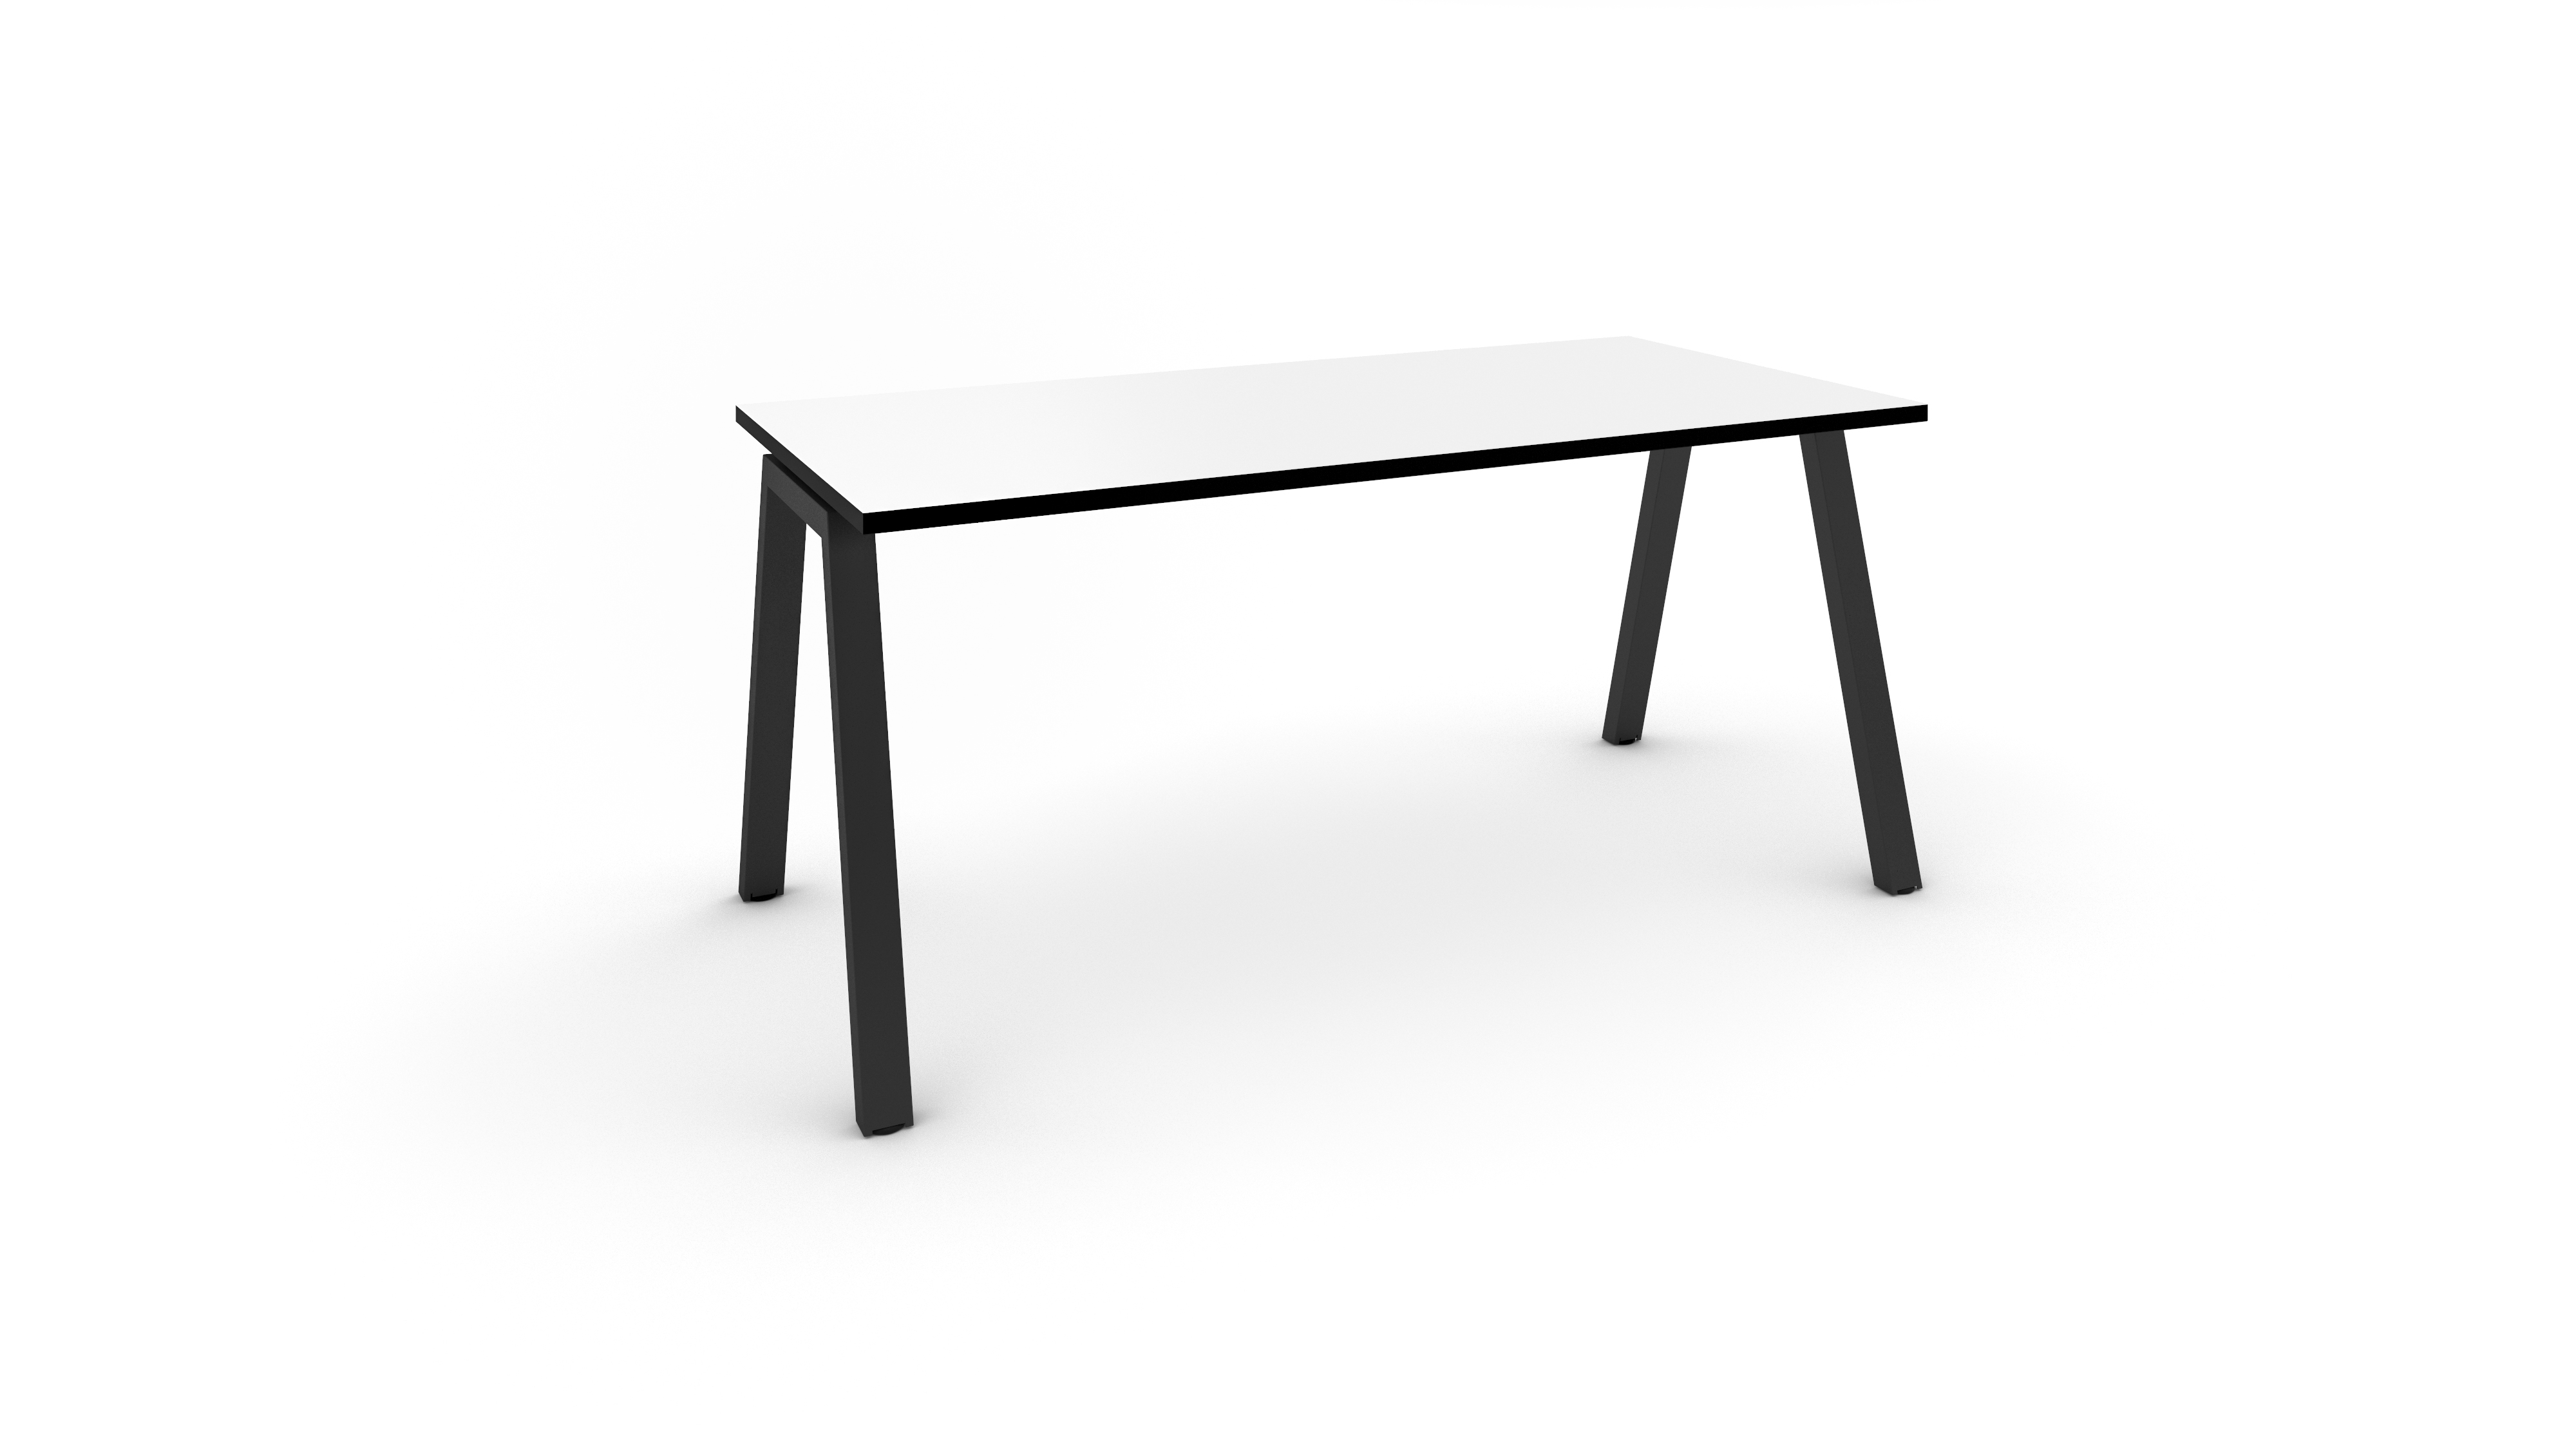 WS - A-frame desk - 1pers - Black frame, White top with black edge